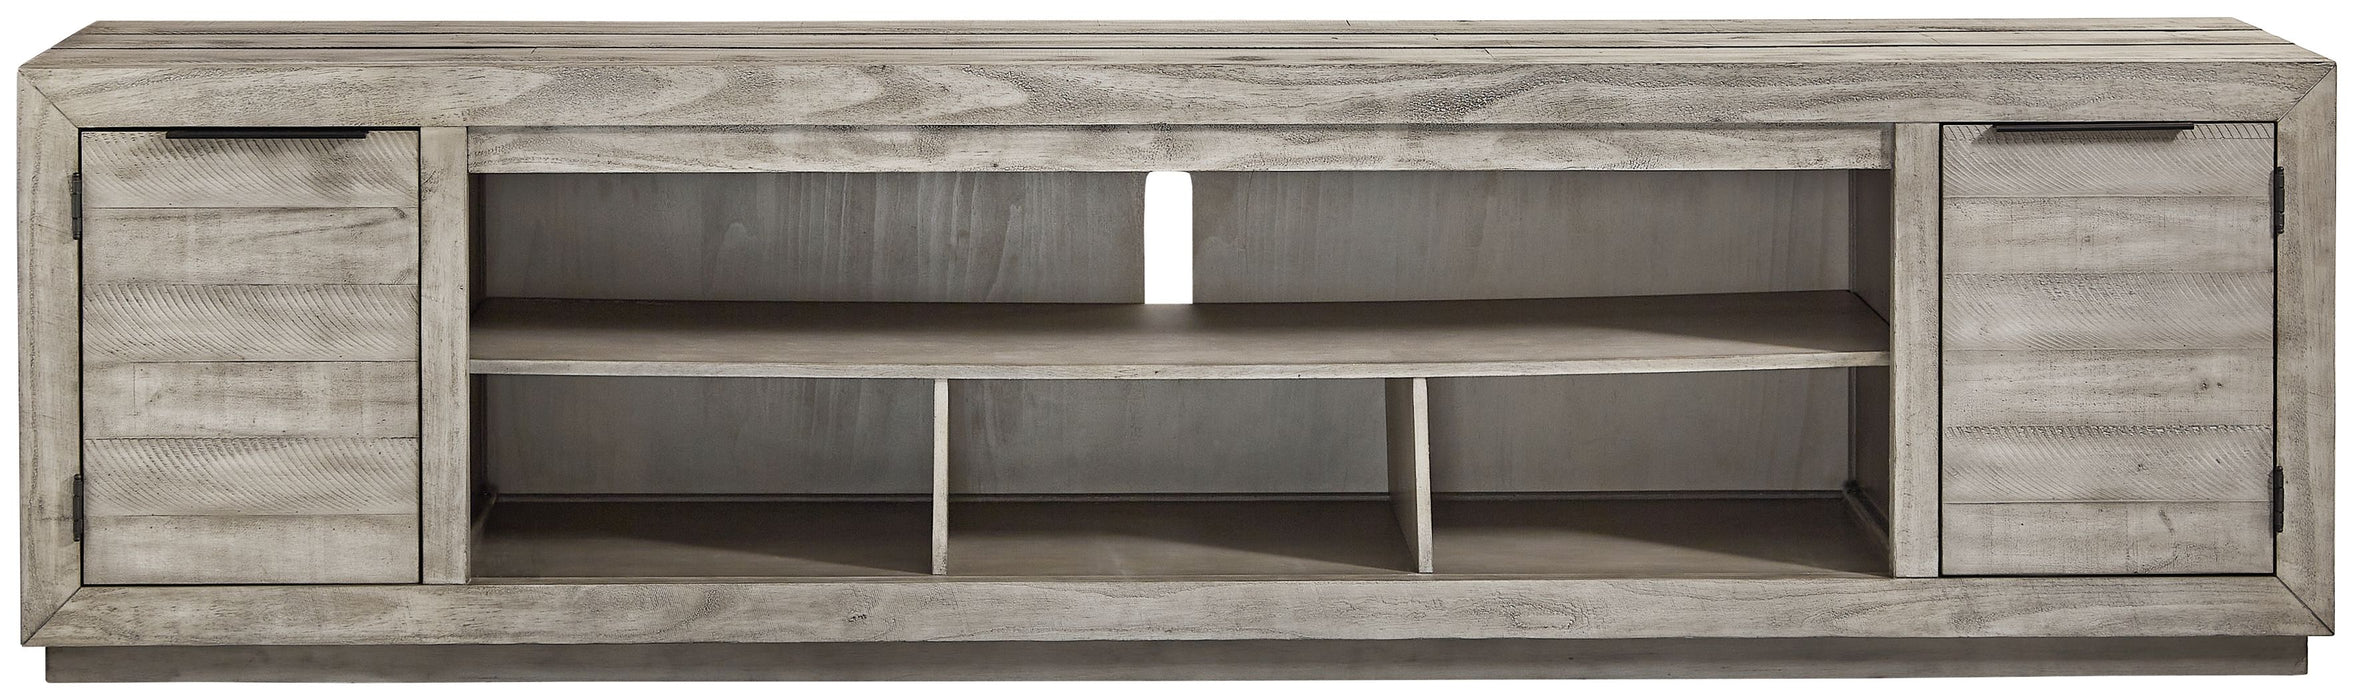 Naydell - Gray - Xl TV Stand W/Fireplace Option